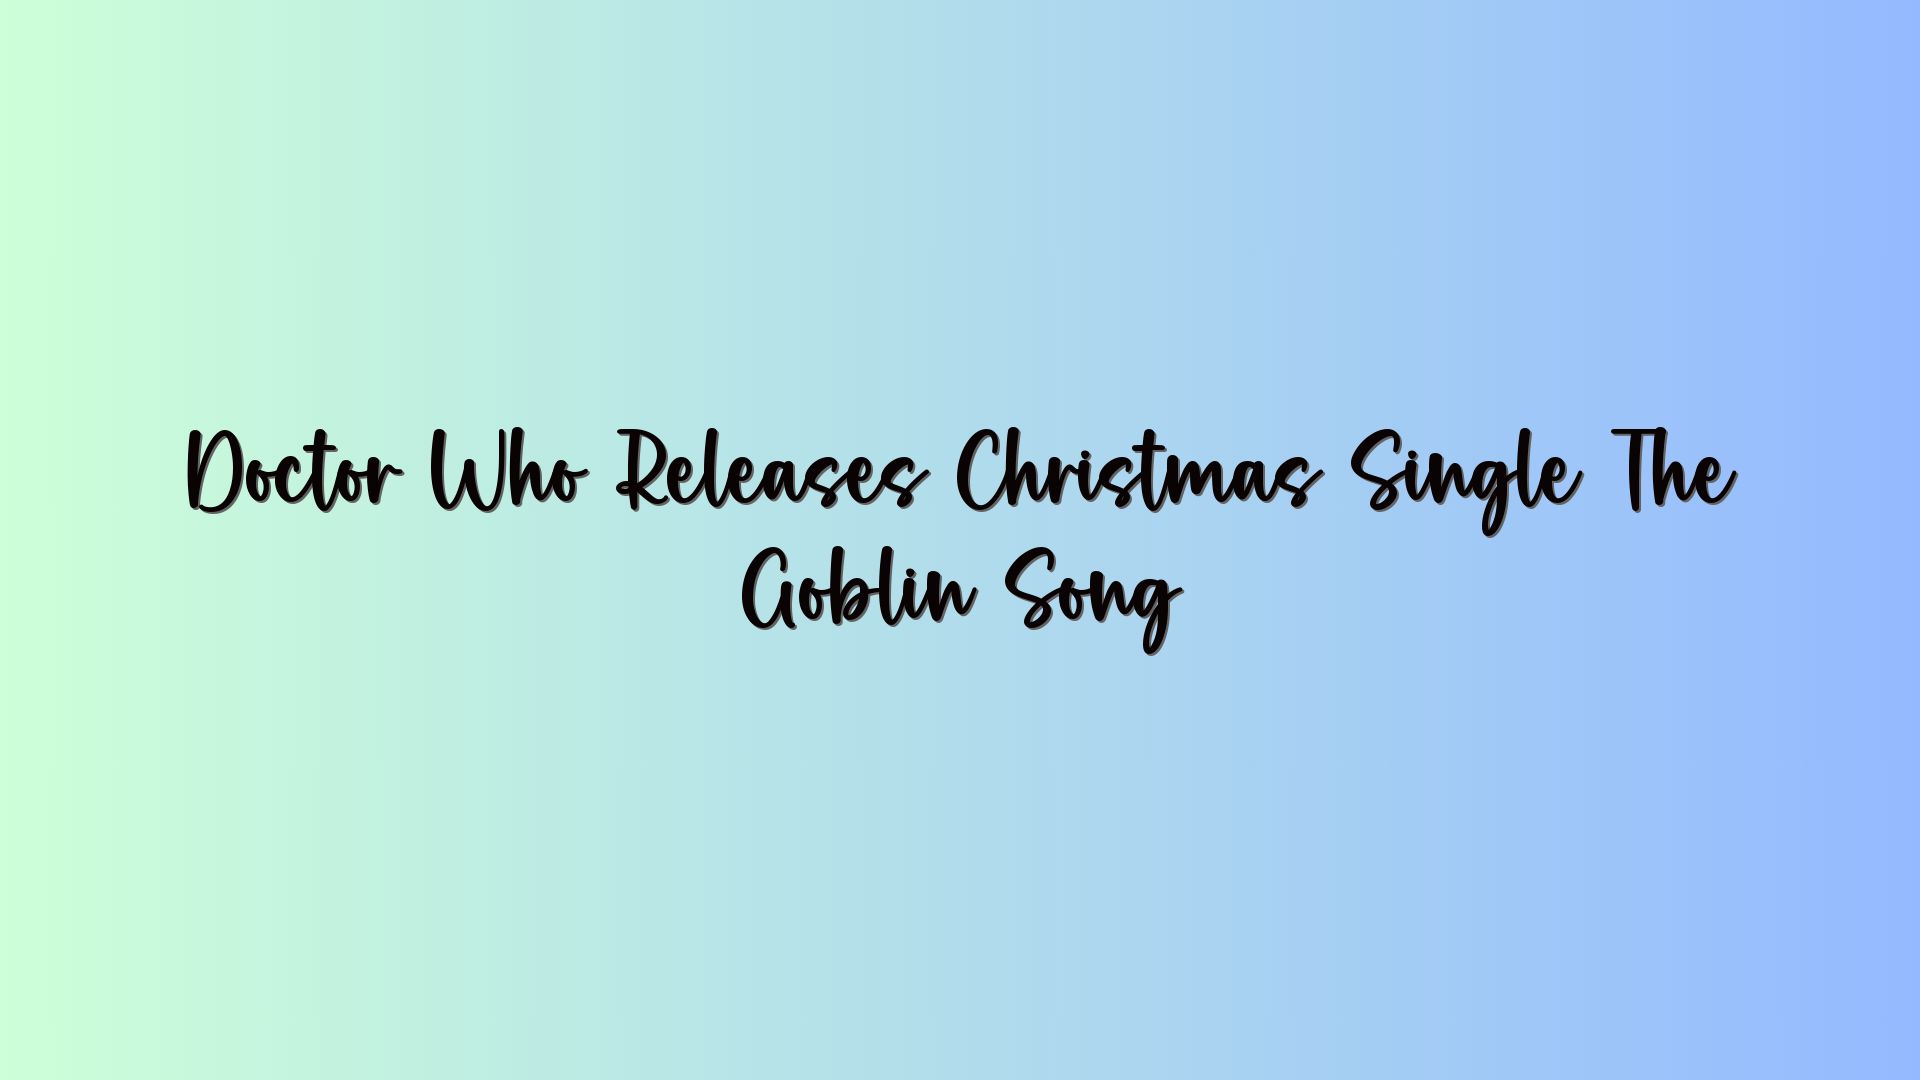 Doctor Who Releases Christmas Single The Goblin Song